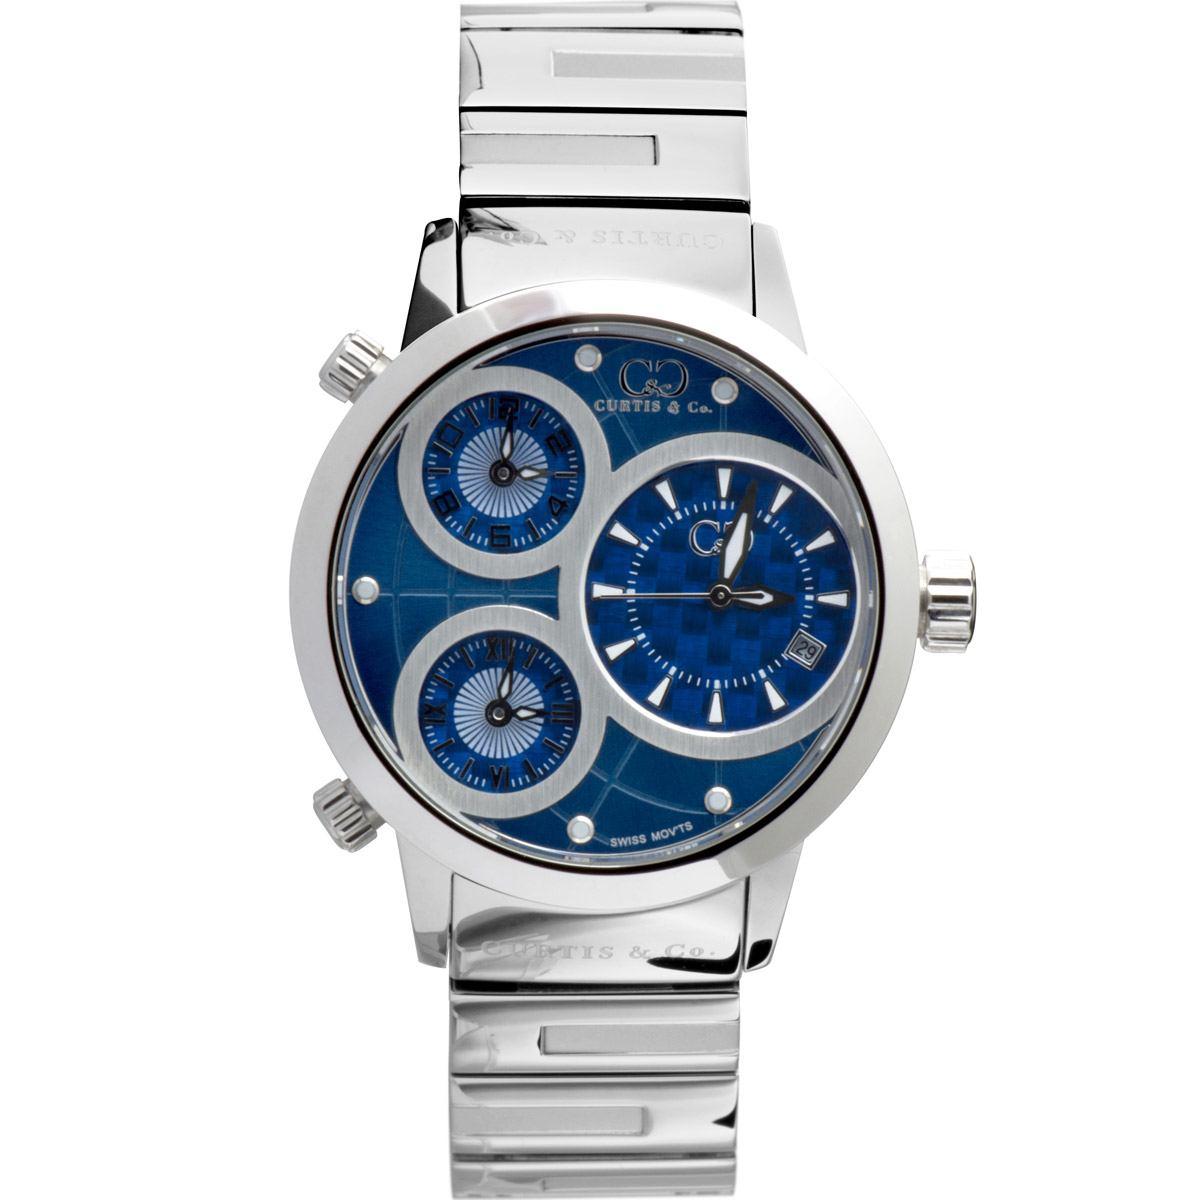 Curtis & Co Big Time World 50mm 3 Time Zone Blue Dial Watch - Flyclothing LLC